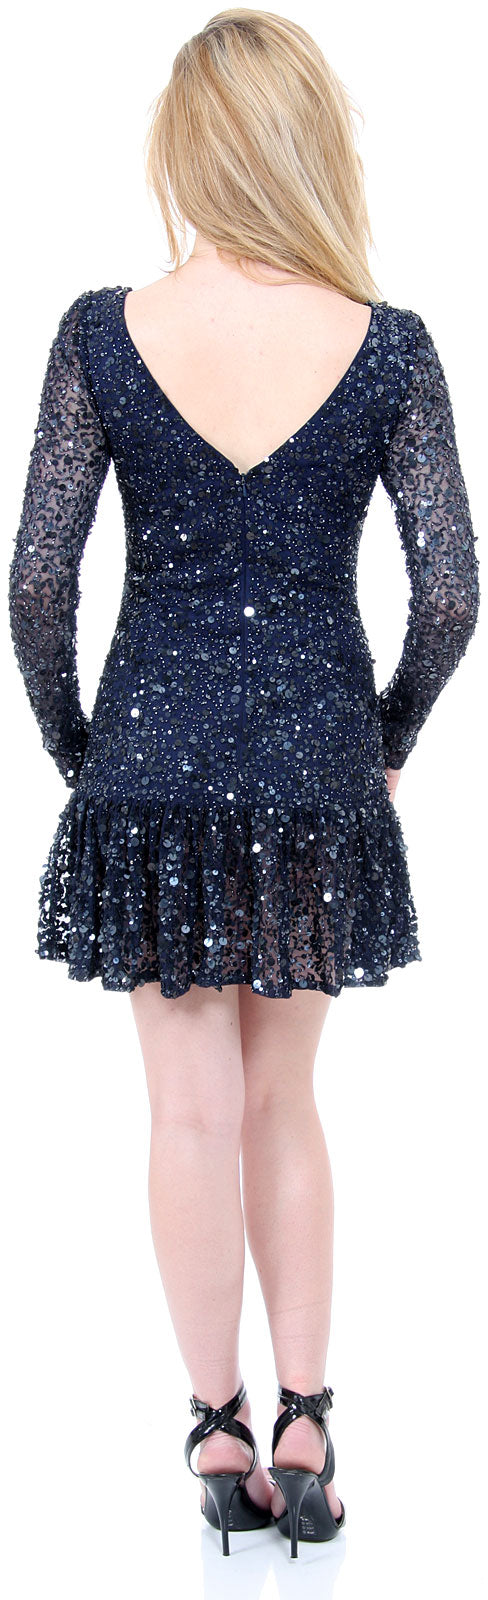 Image of Full Sleeves Flared Skirt Sequined Mini Party Dress back in Navy